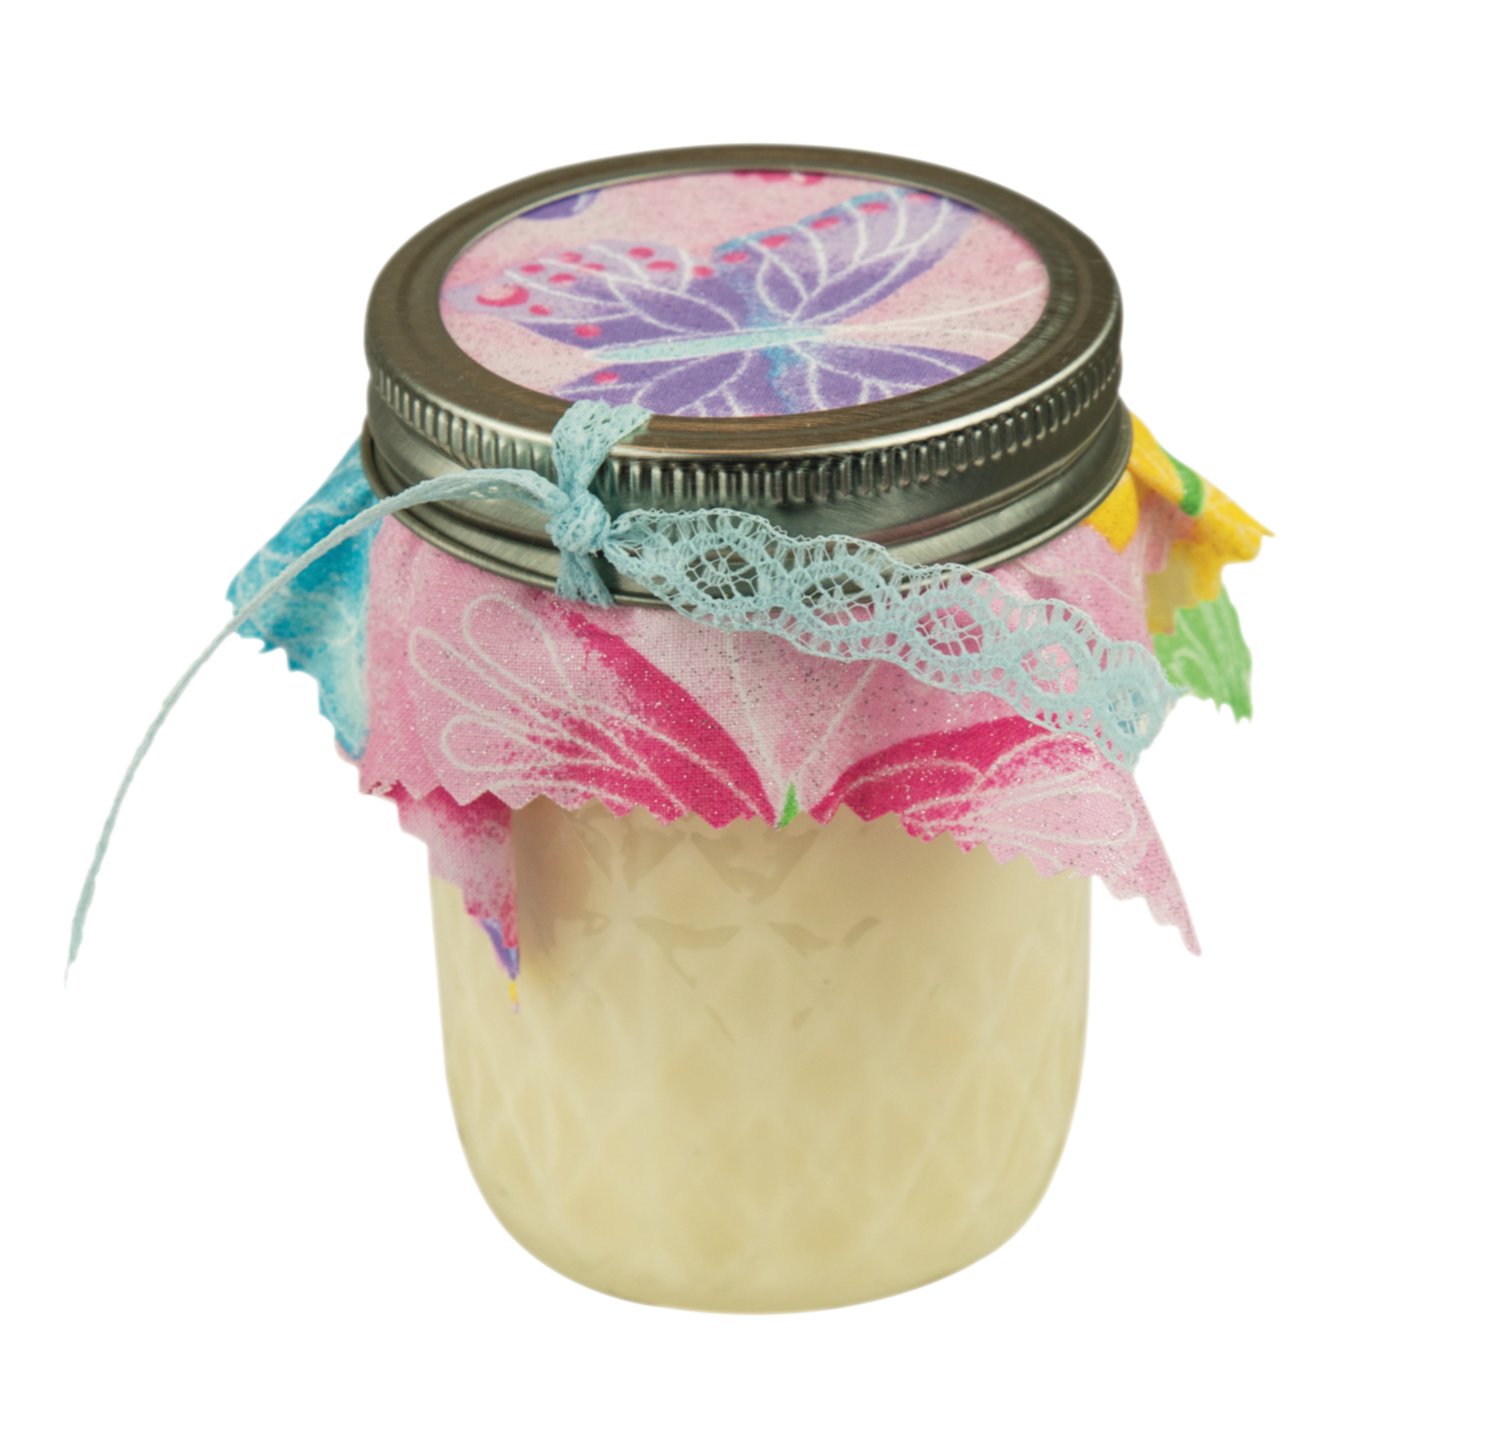 Naturally Lou Candles: Soy candles made with phthalate-free fragrance and decorated with vintage materials. 8 oz, $10. Find at the Providence Flea.